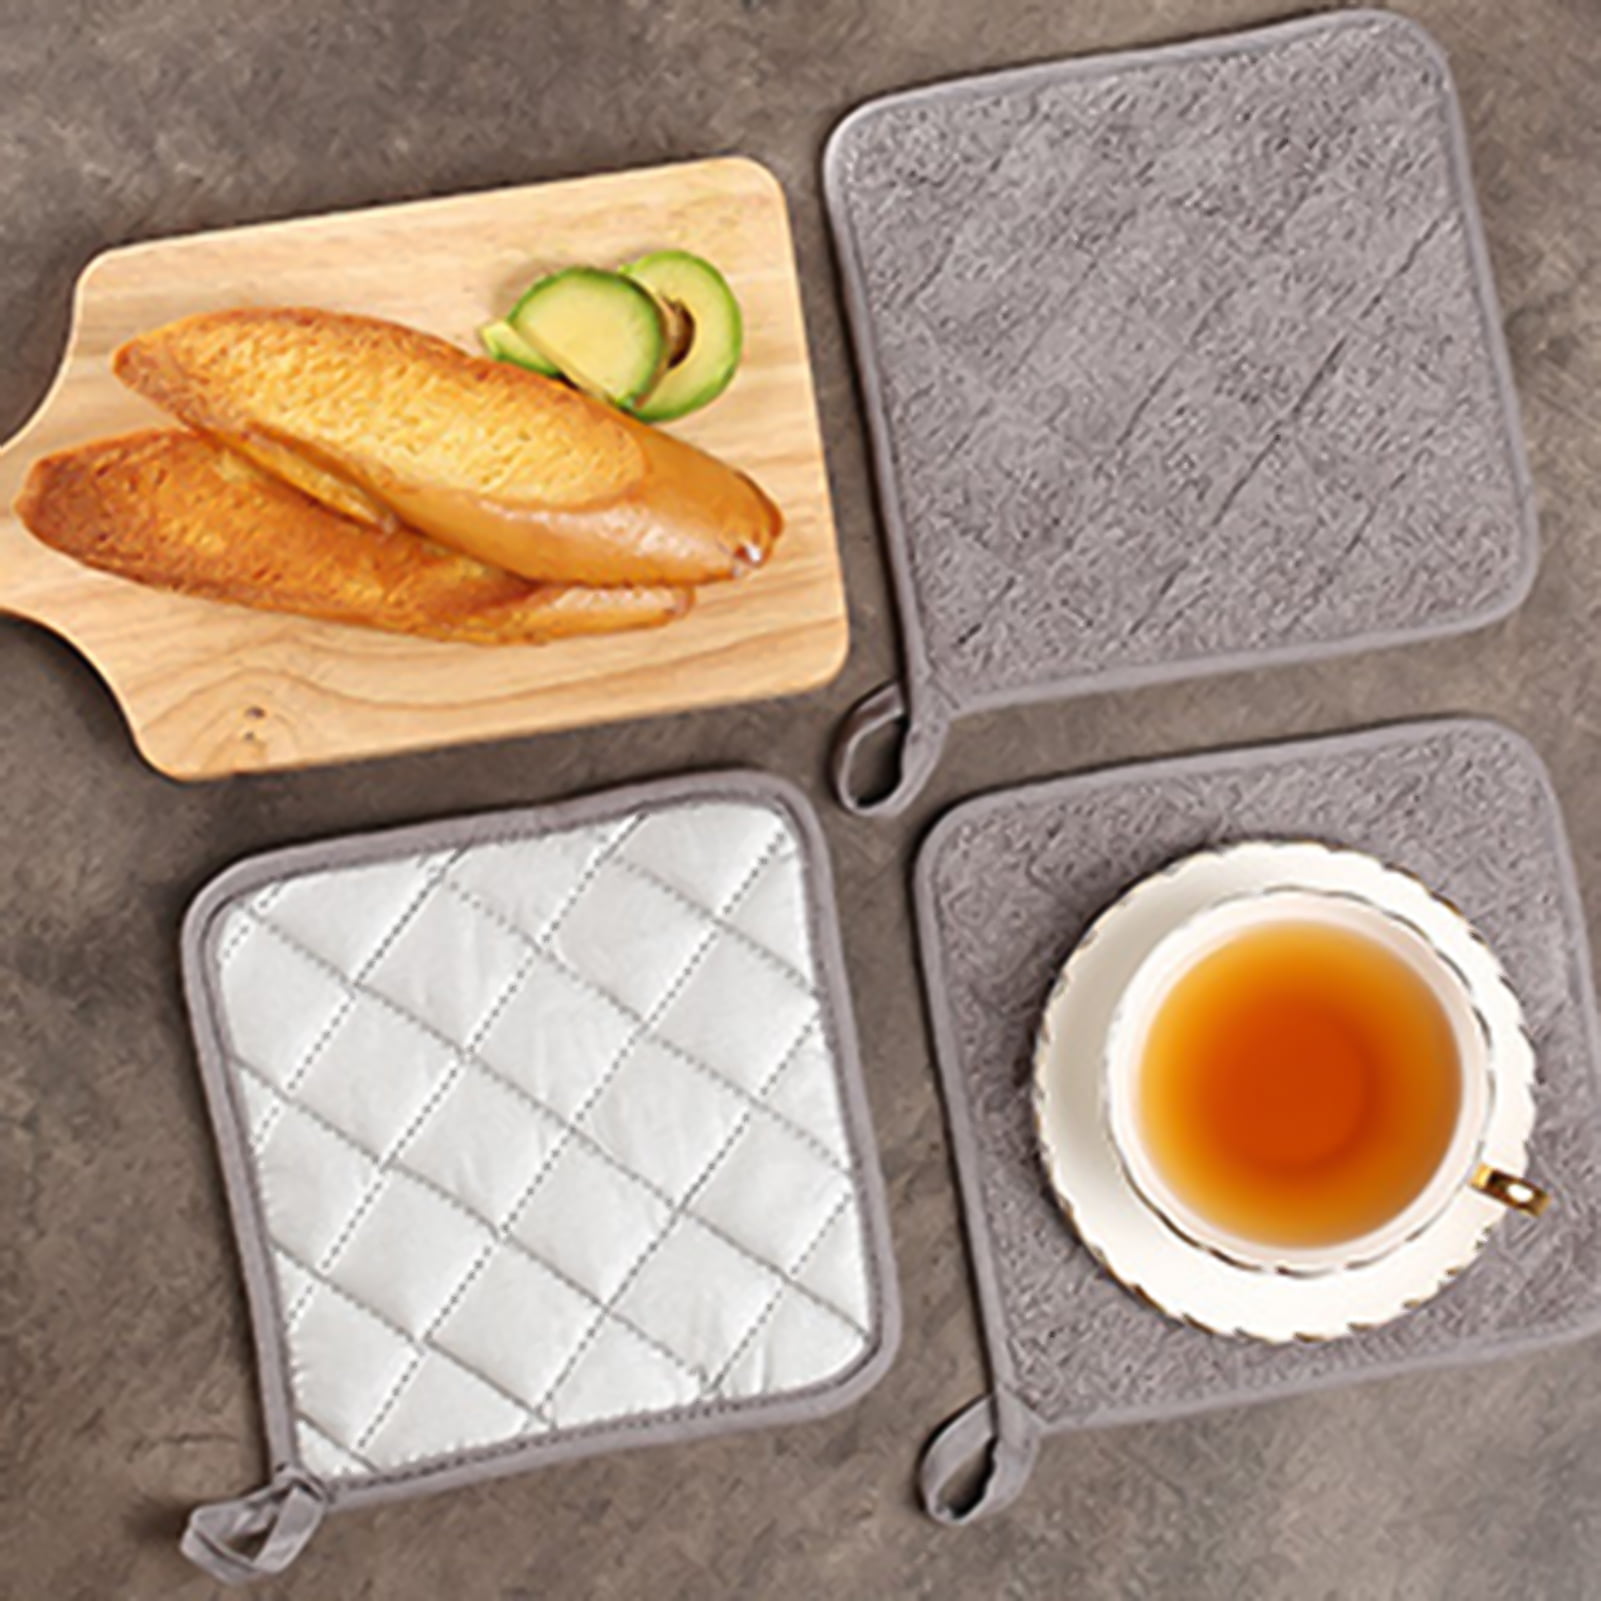 Travelwant 2pcs Pot Holders with Pocket- Soft Cotton Hot Pads with Non-Slip Silicone Grip and Hanging Loop - Heat Resistant Kitchen Potholders Trivet